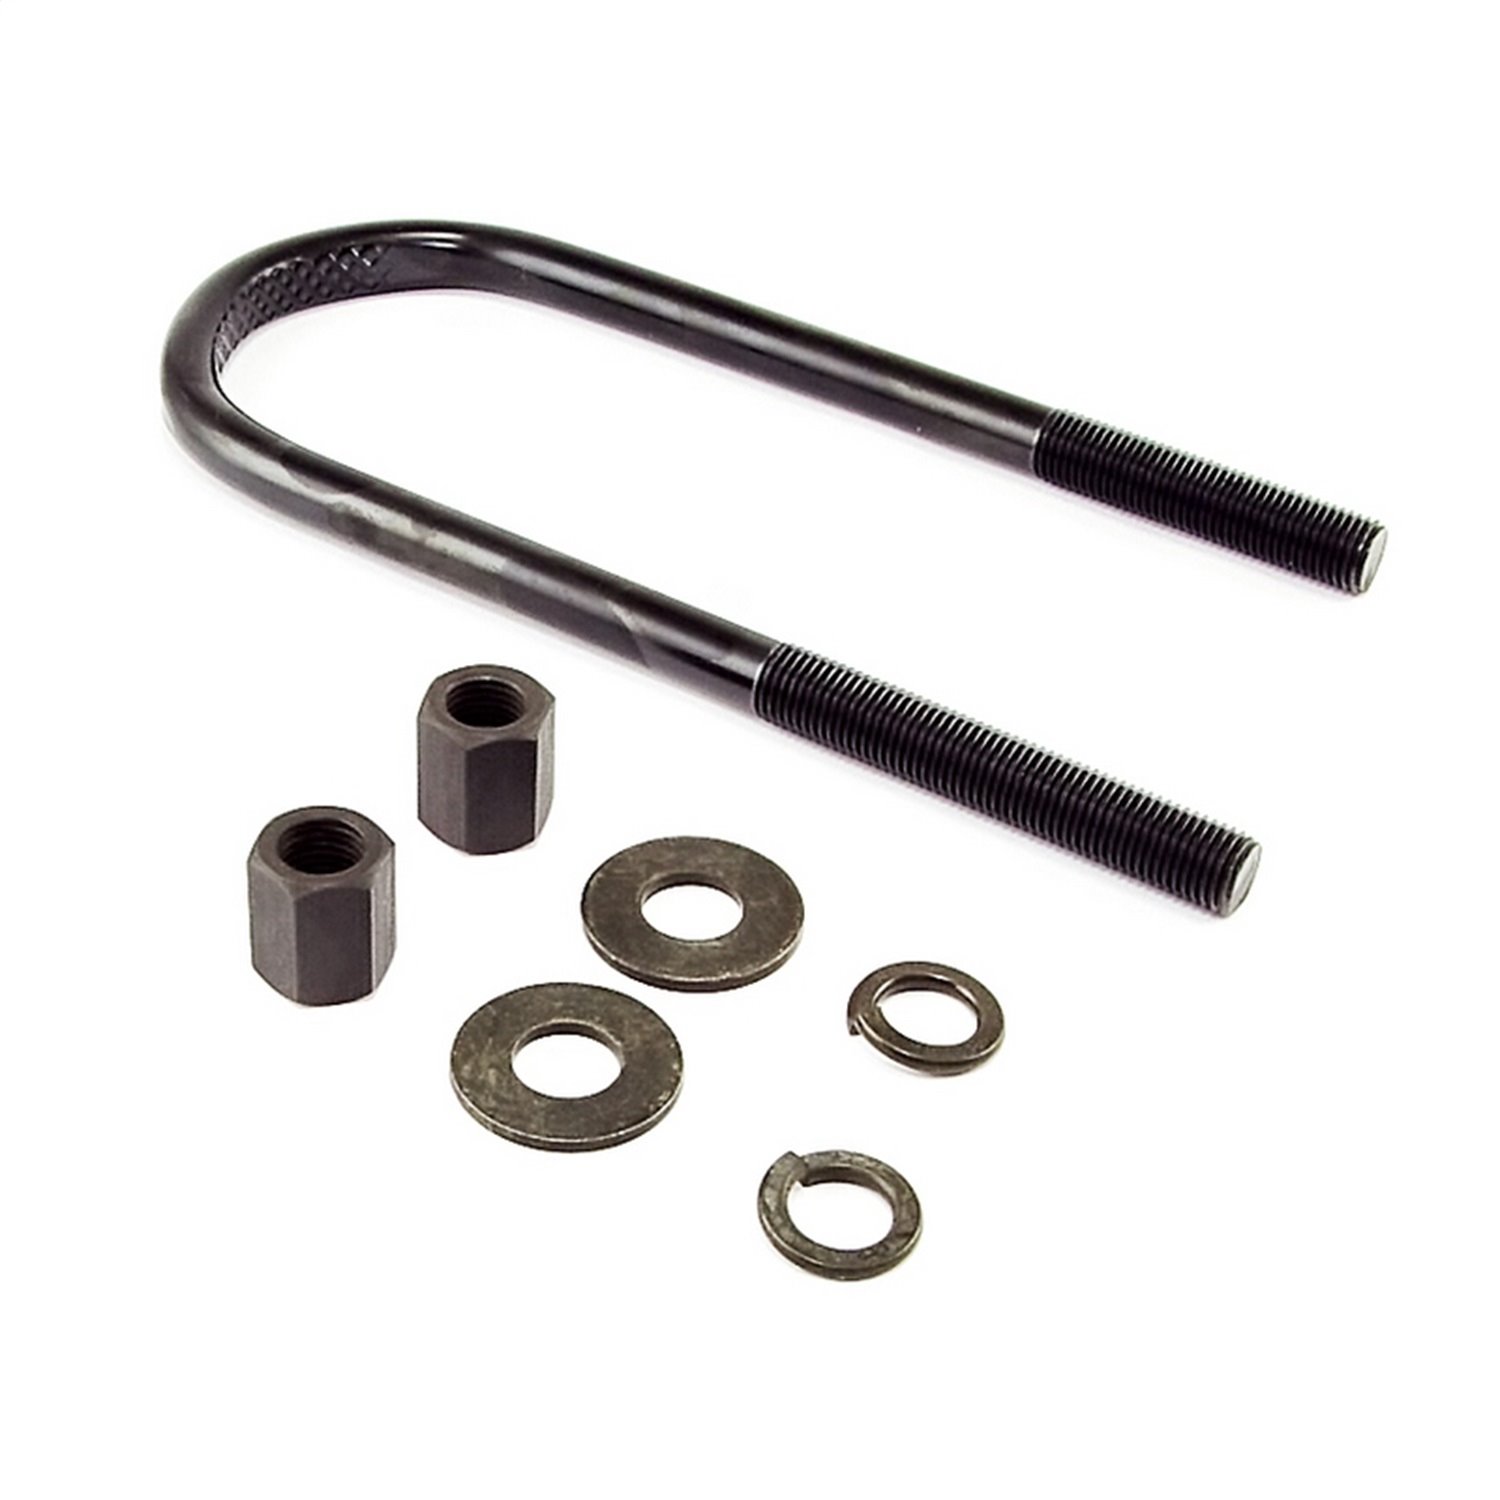 small replacement U-bolt from Omix-ADA, Fits front axle of 47-62 Willys trucks with a 226 cubic inch 6-cylinder engine.